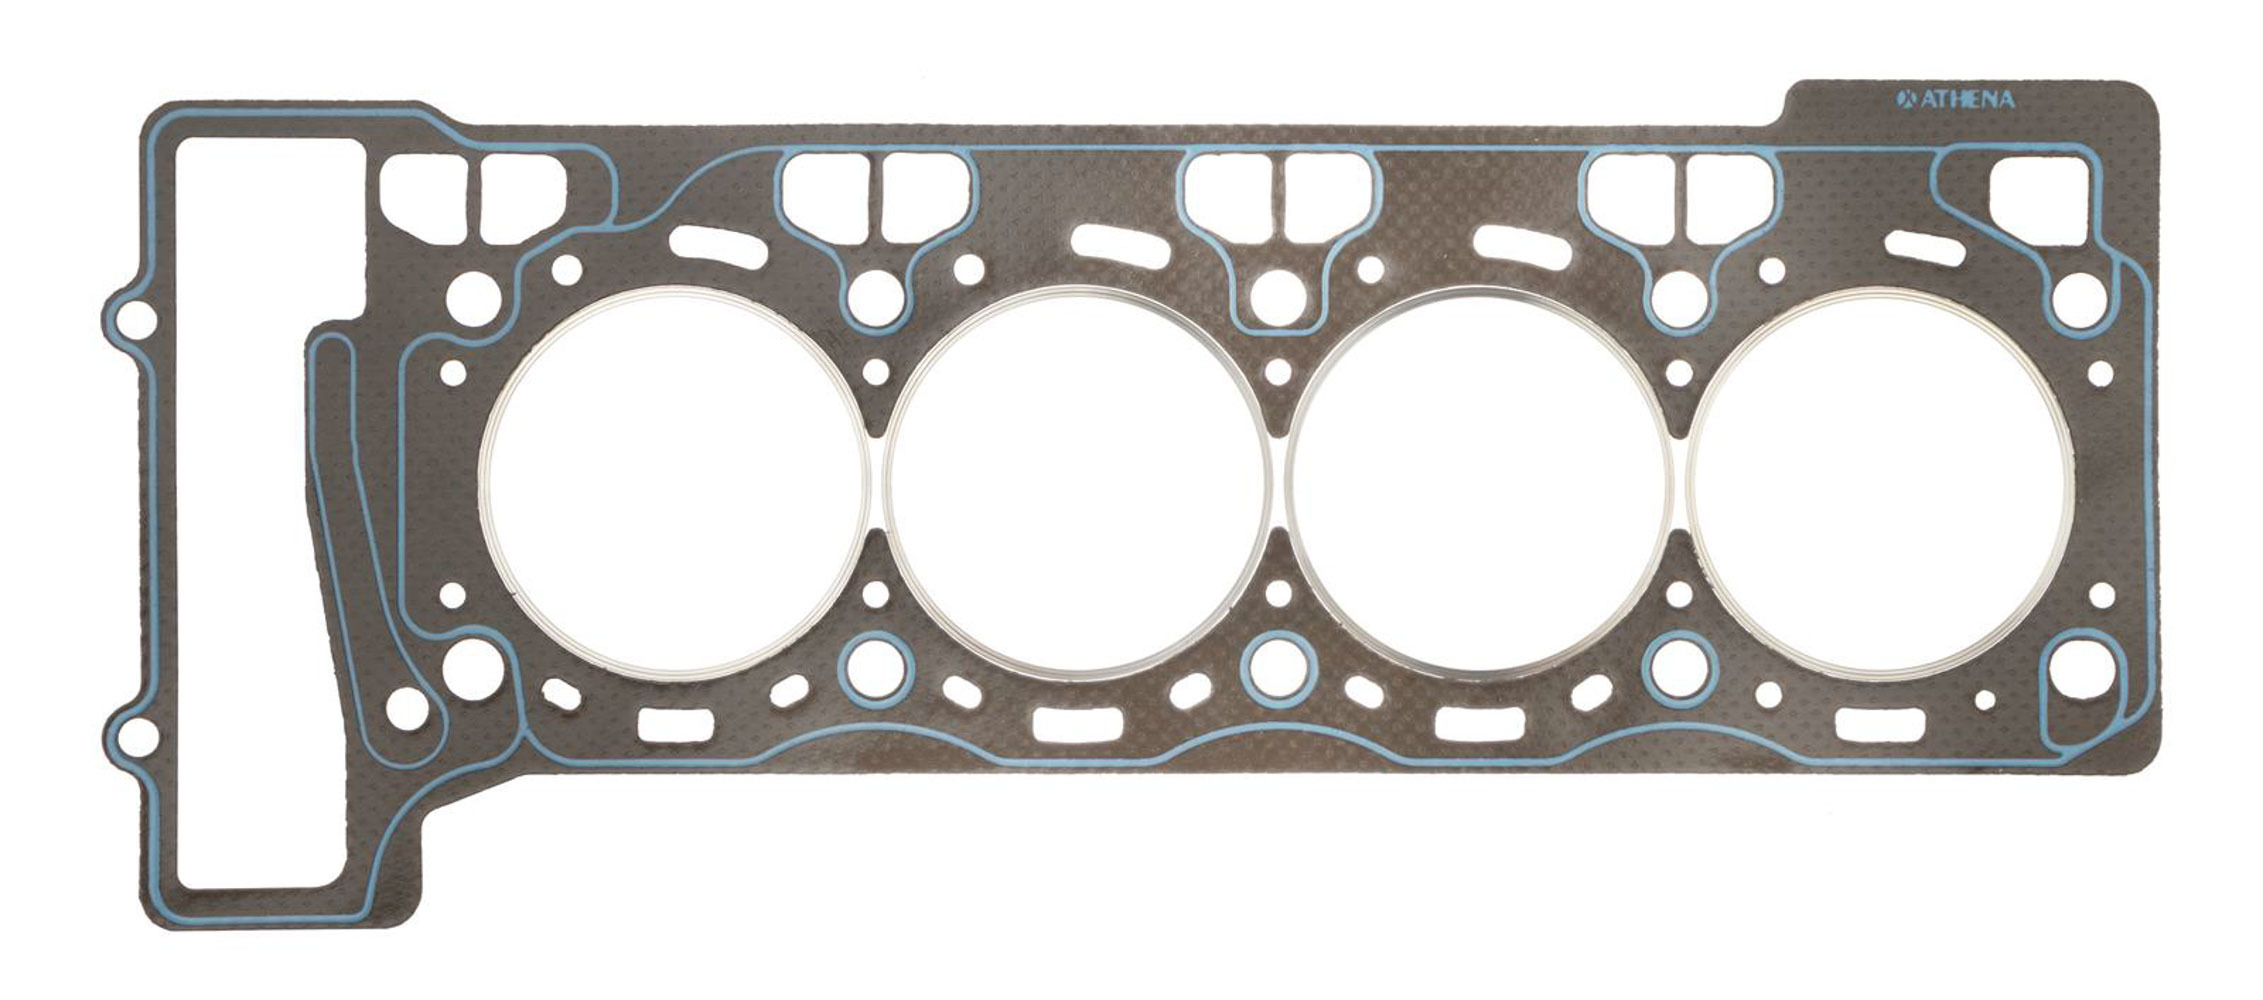 SCE Gaskets CR330073 - Cylinder Head Gasket, Vulcan Cut Ring, 90.50 mm Bore, 1.10 mm Compression Thickness, Steel Core Laminate, BMW V8, Each